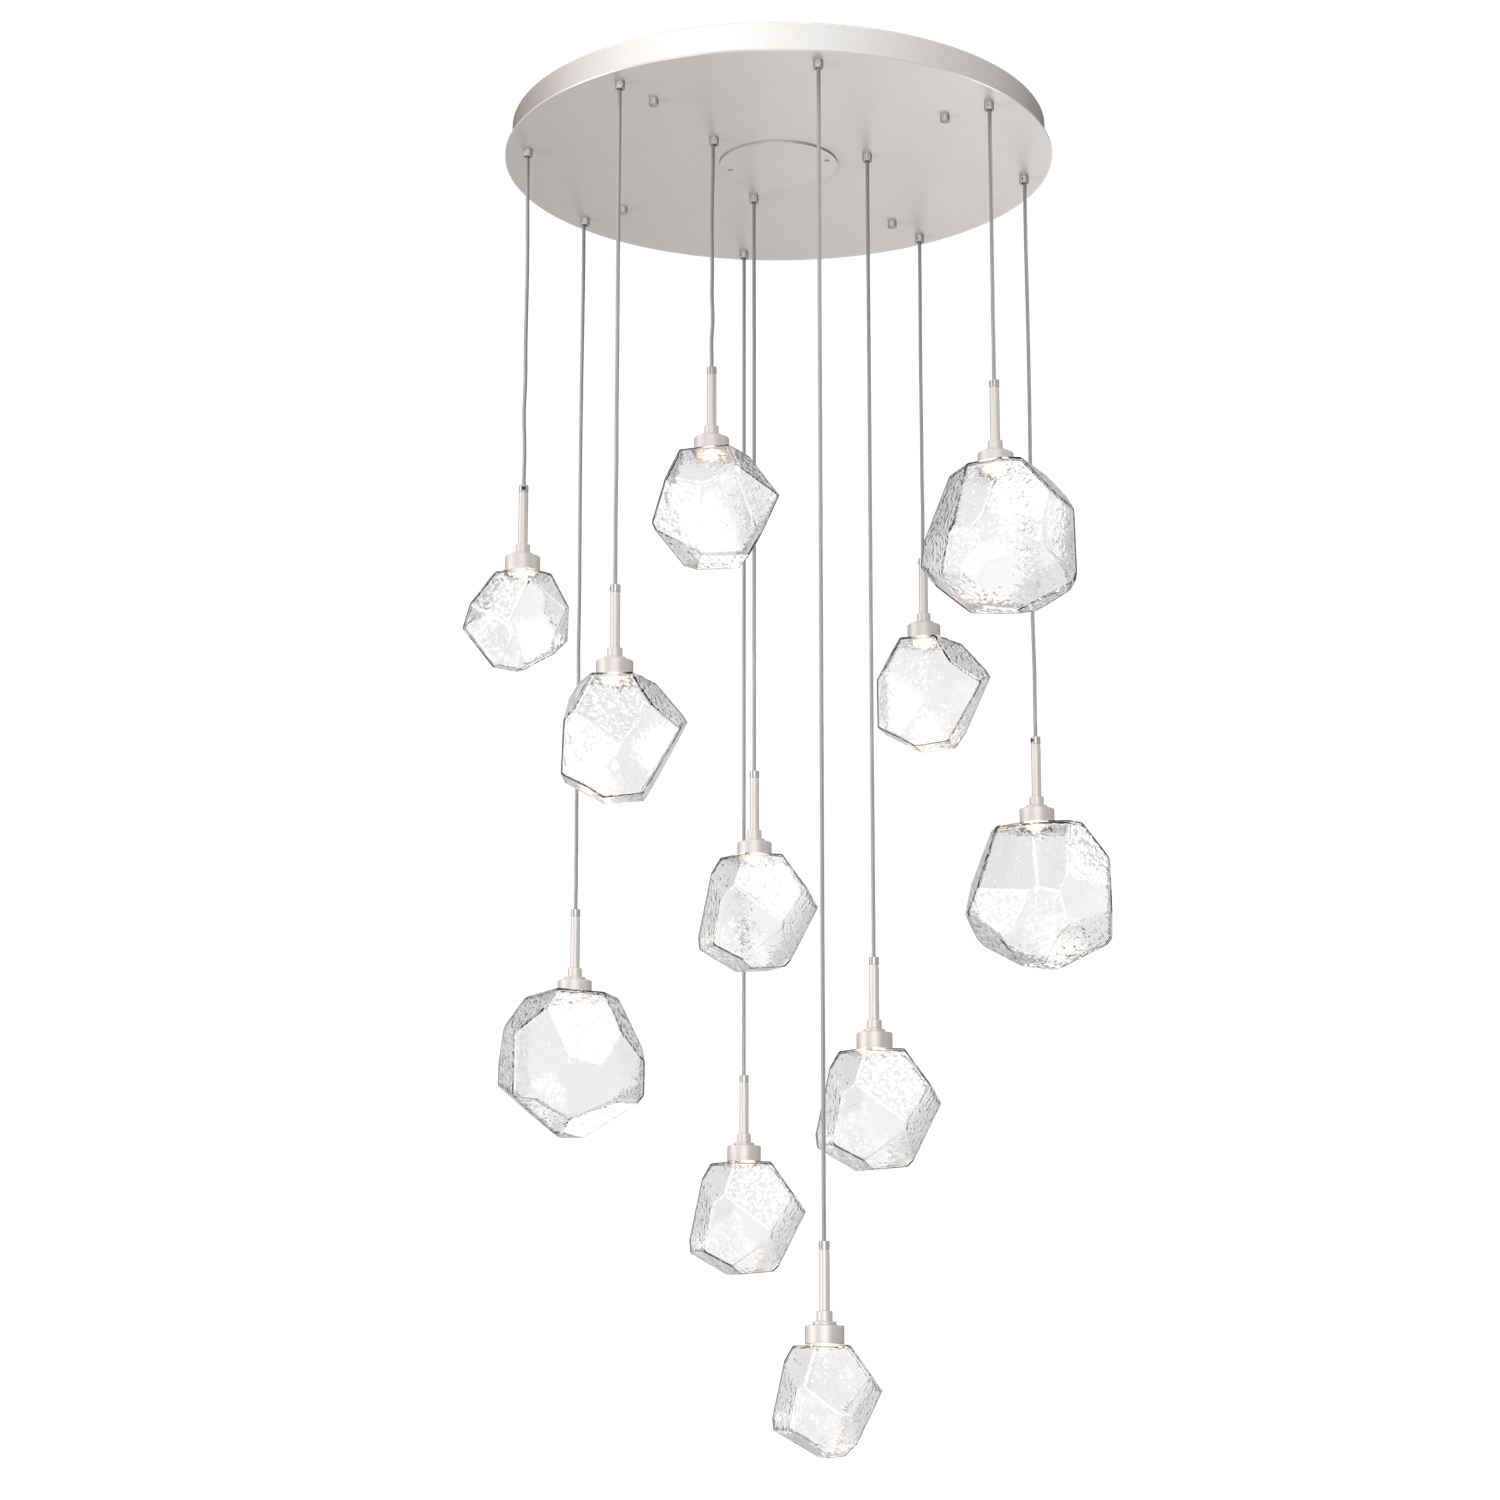 CHB0039-11-BS-C-Hammerton-Studio-Gem-11-light-round-pendant-chandelier-with-metallic-beige-silver-finish-and-clear-blown-glass-shades-and-LED-lamping